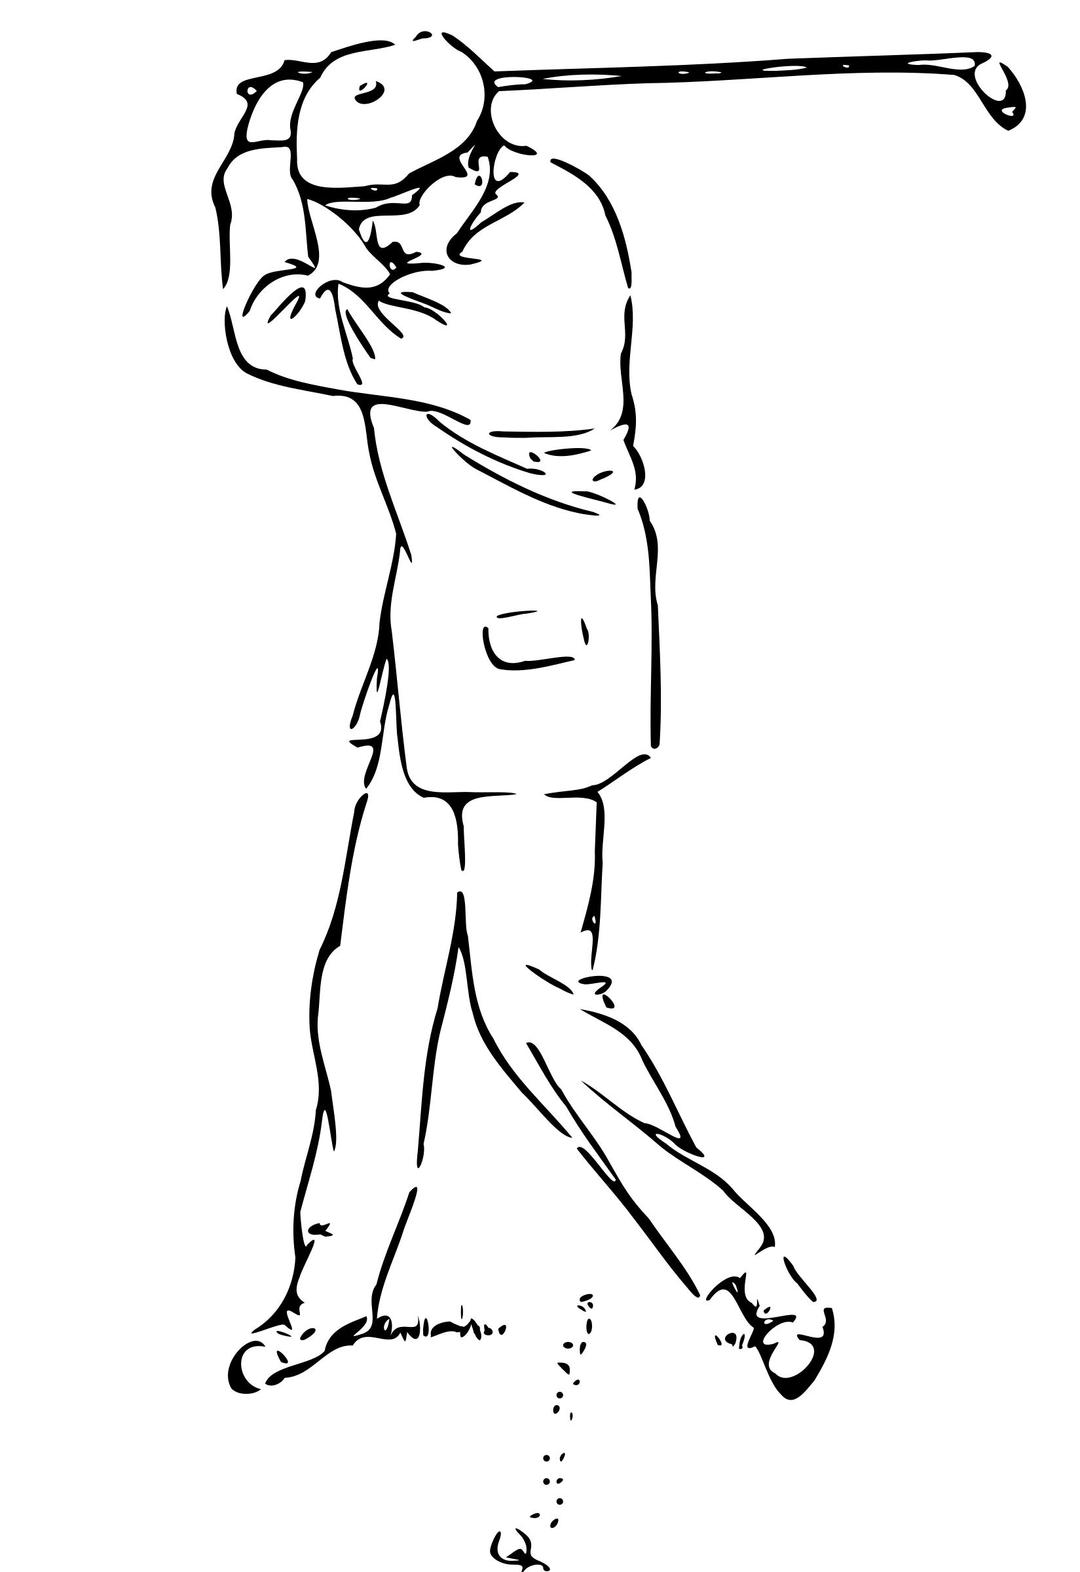 Golfer at the top of the stroke png transparent